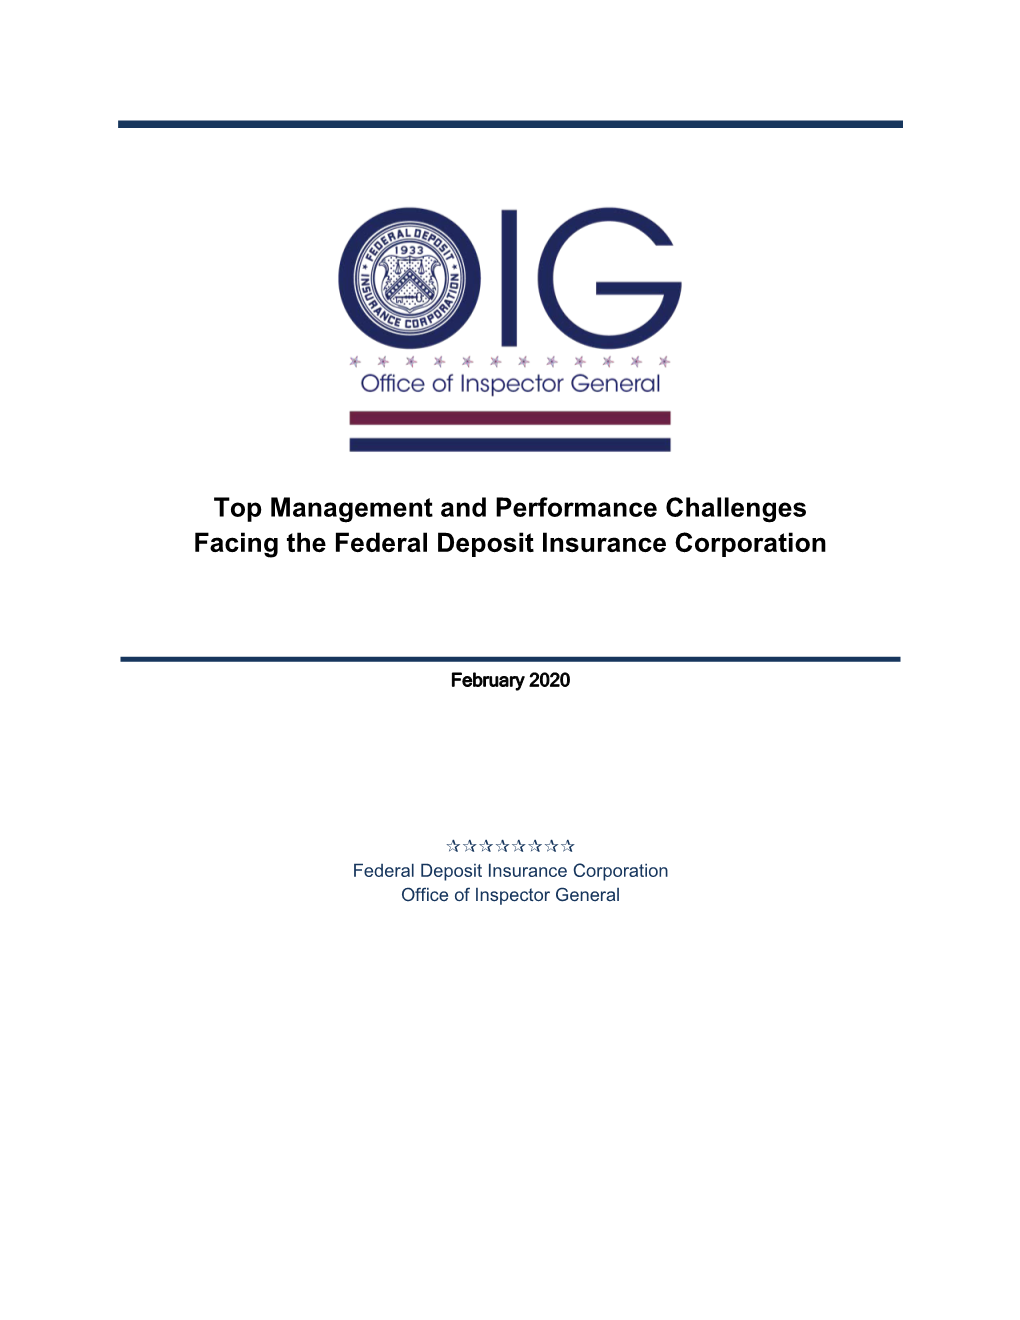 Top Management and Performance Challenges Facing the Federal Deposit Insurance Corporation